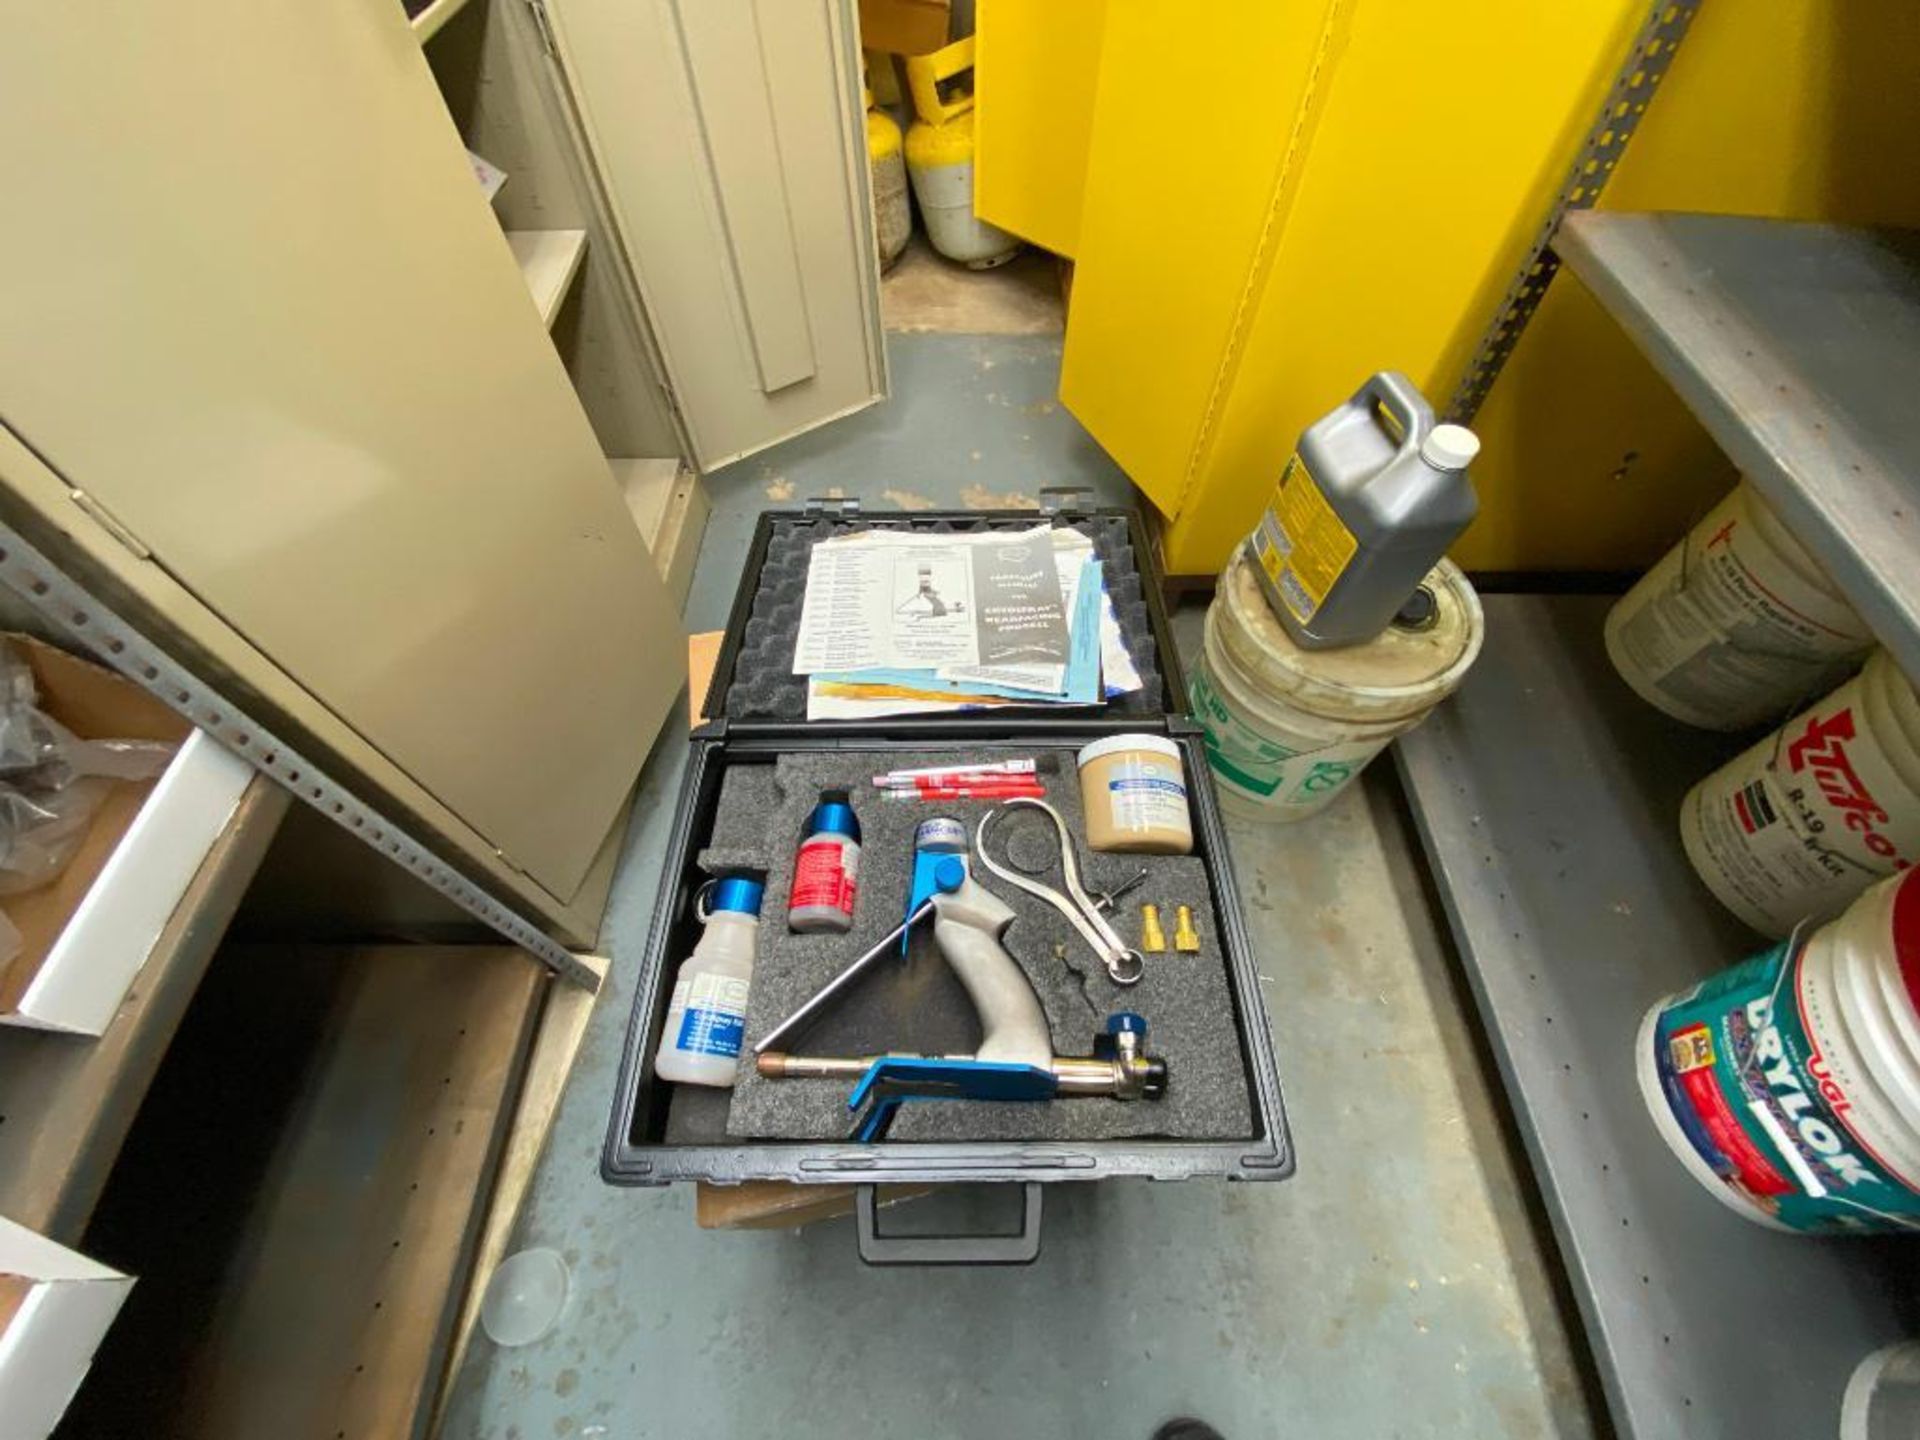 contents of supply room, JustRite flammable storage cabinets, SPX pump, assorted bits, Cryospray, in - Image 12 of 31